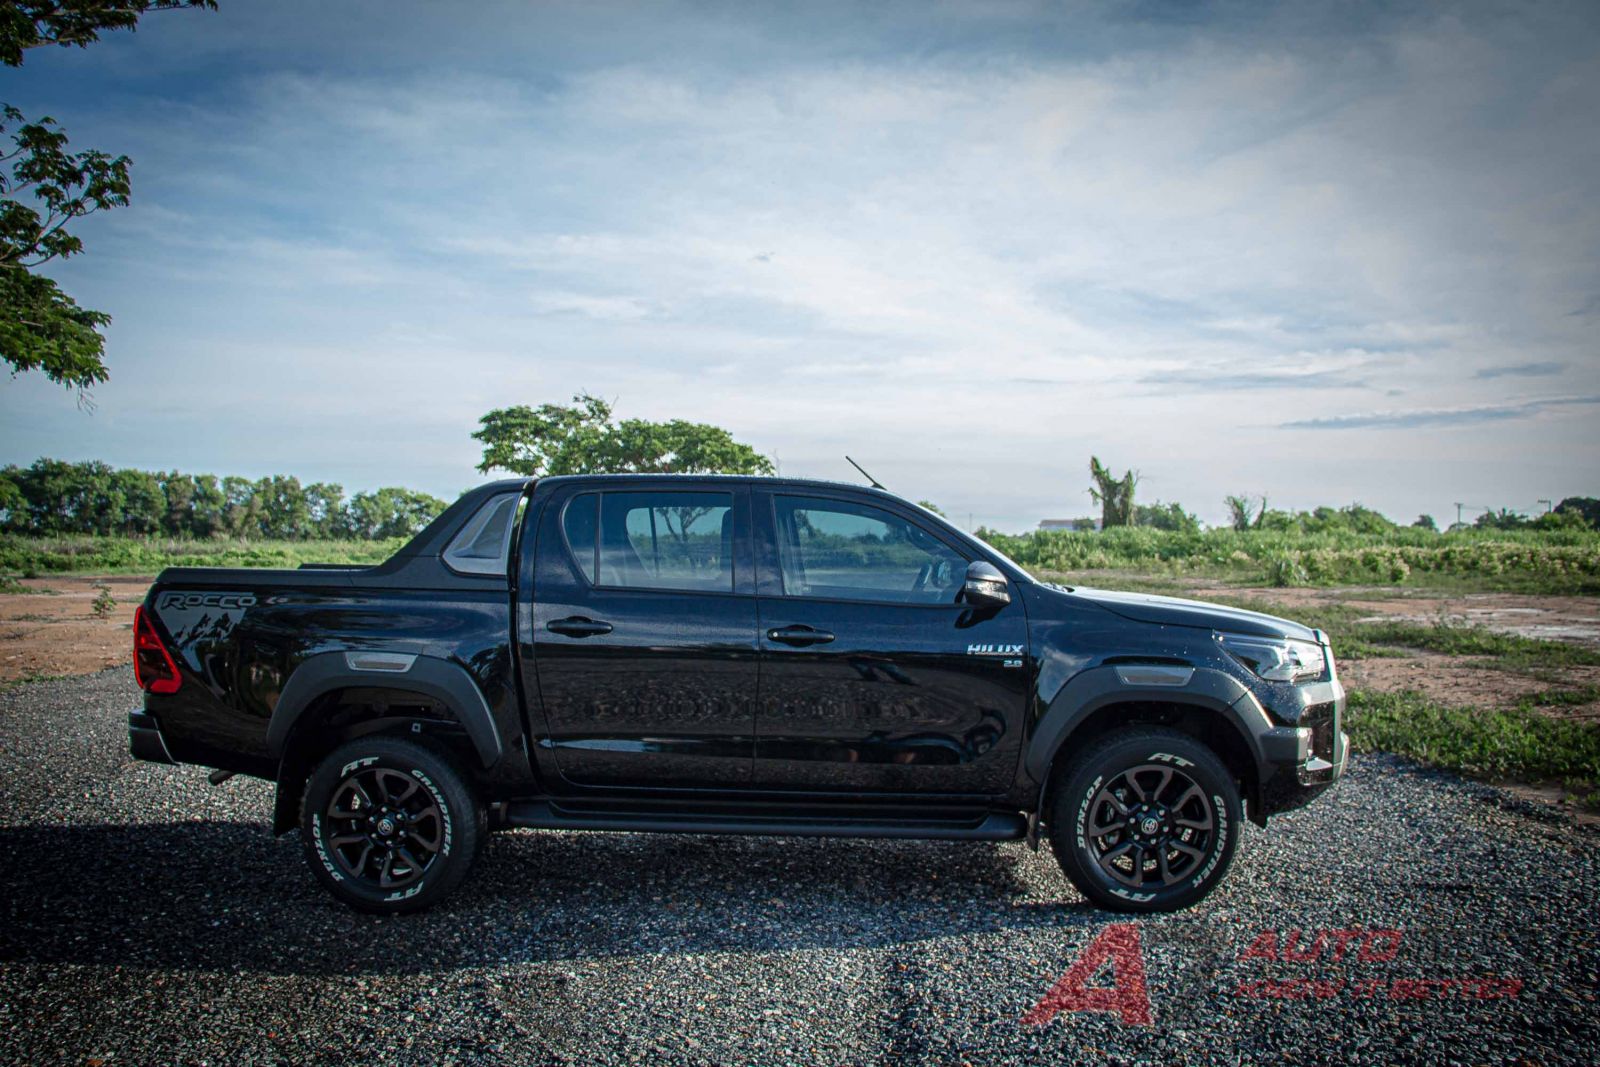 Toyota Hilux Revo Double Cab 4x4 2.8 Rocco AT